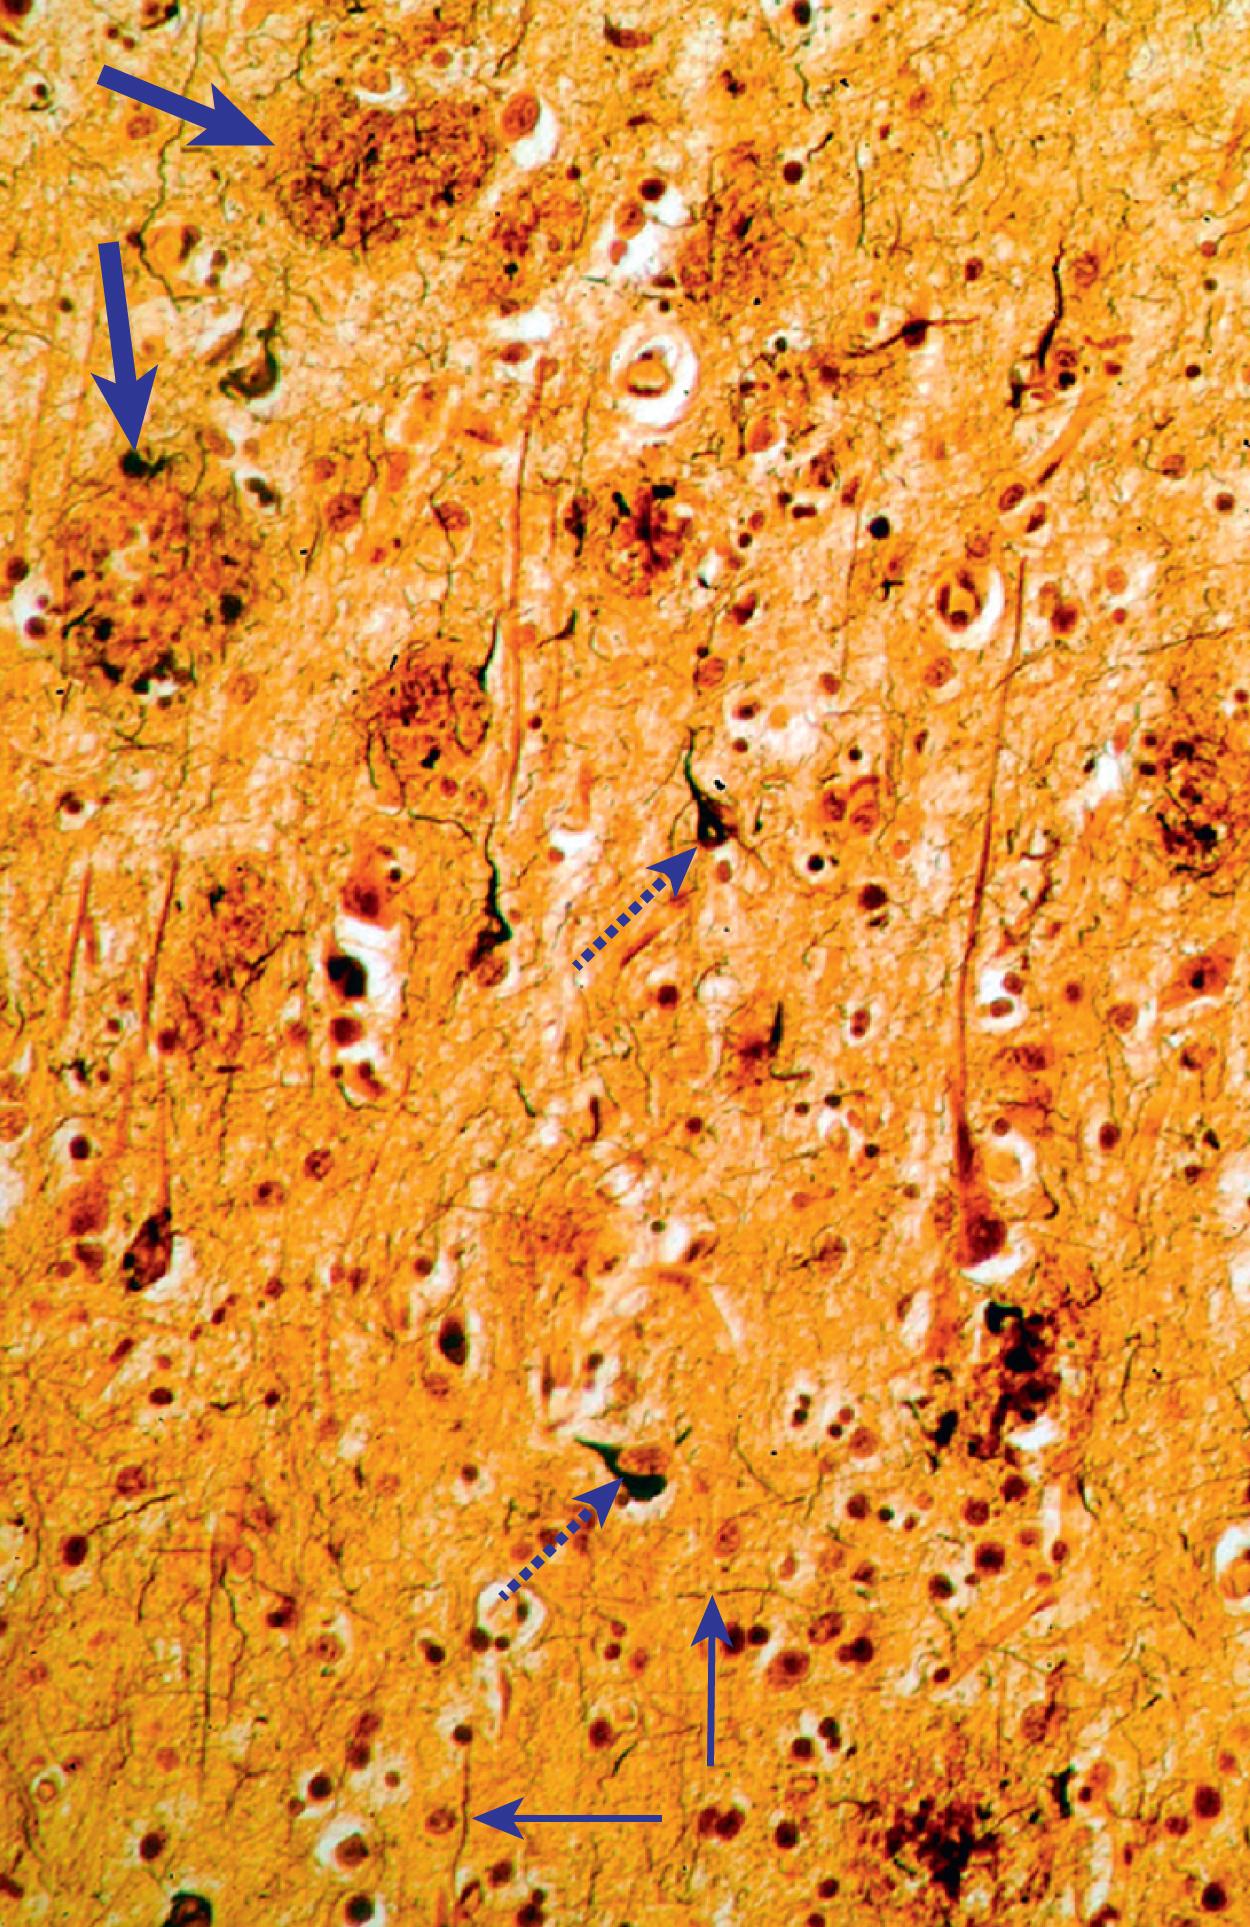 Fig. 4.9, Light microscopic view of Alzheimer’s pathology. Plaques (thick arrows) , tangles (dotted arrows) , and neuropil threads (thin arrows) in Alzheimer’s disease.